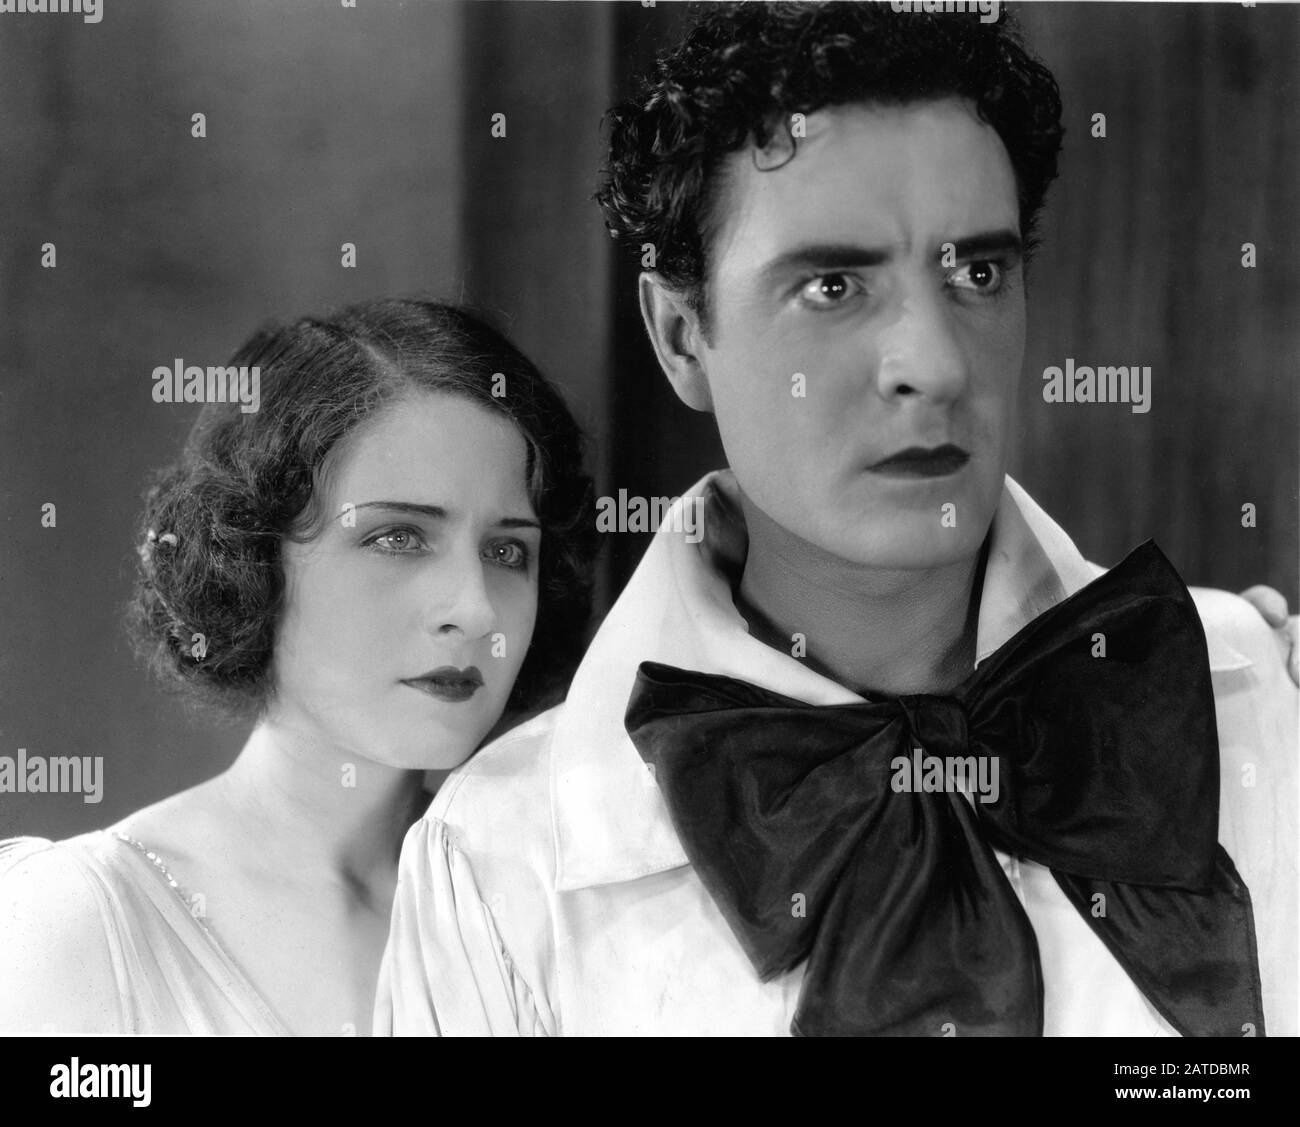 NORMA SHEARER and JOHN GILBERT in HE WHO GETS SLAPPED 1924 director VICTOR SEASTROM / SJOSTROM from play by Leonid Andreyev Silent movie producer LOUIS B. MAYER Metro - Goldwyn Pictures Corporation Stock Photo